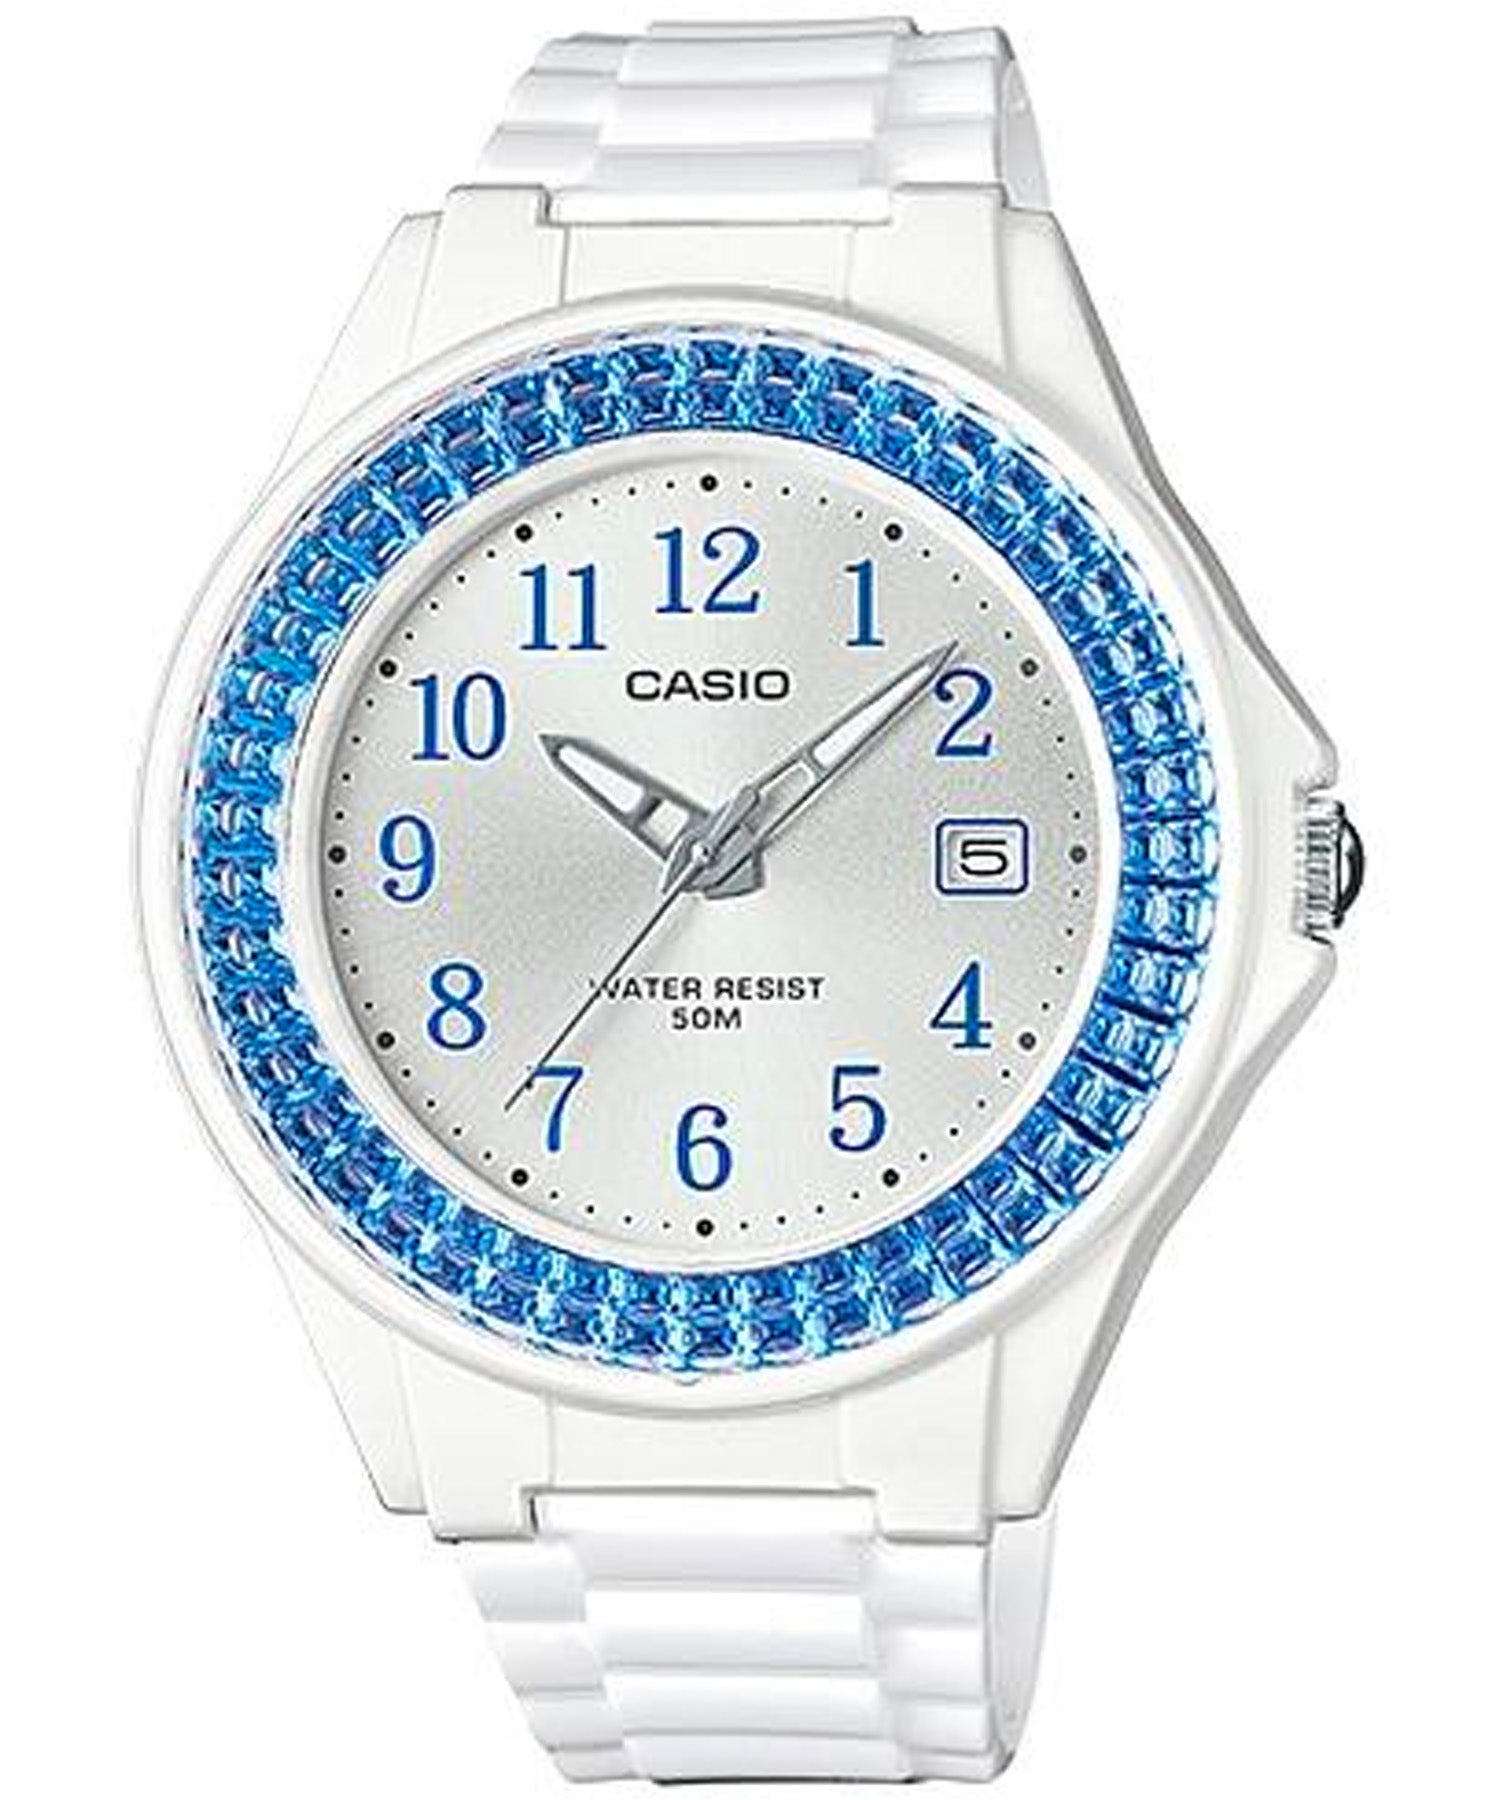 Casio, Women’s Watch Analog, Silver & Blue Dial White Resin Band, LX-500H-2BVDF